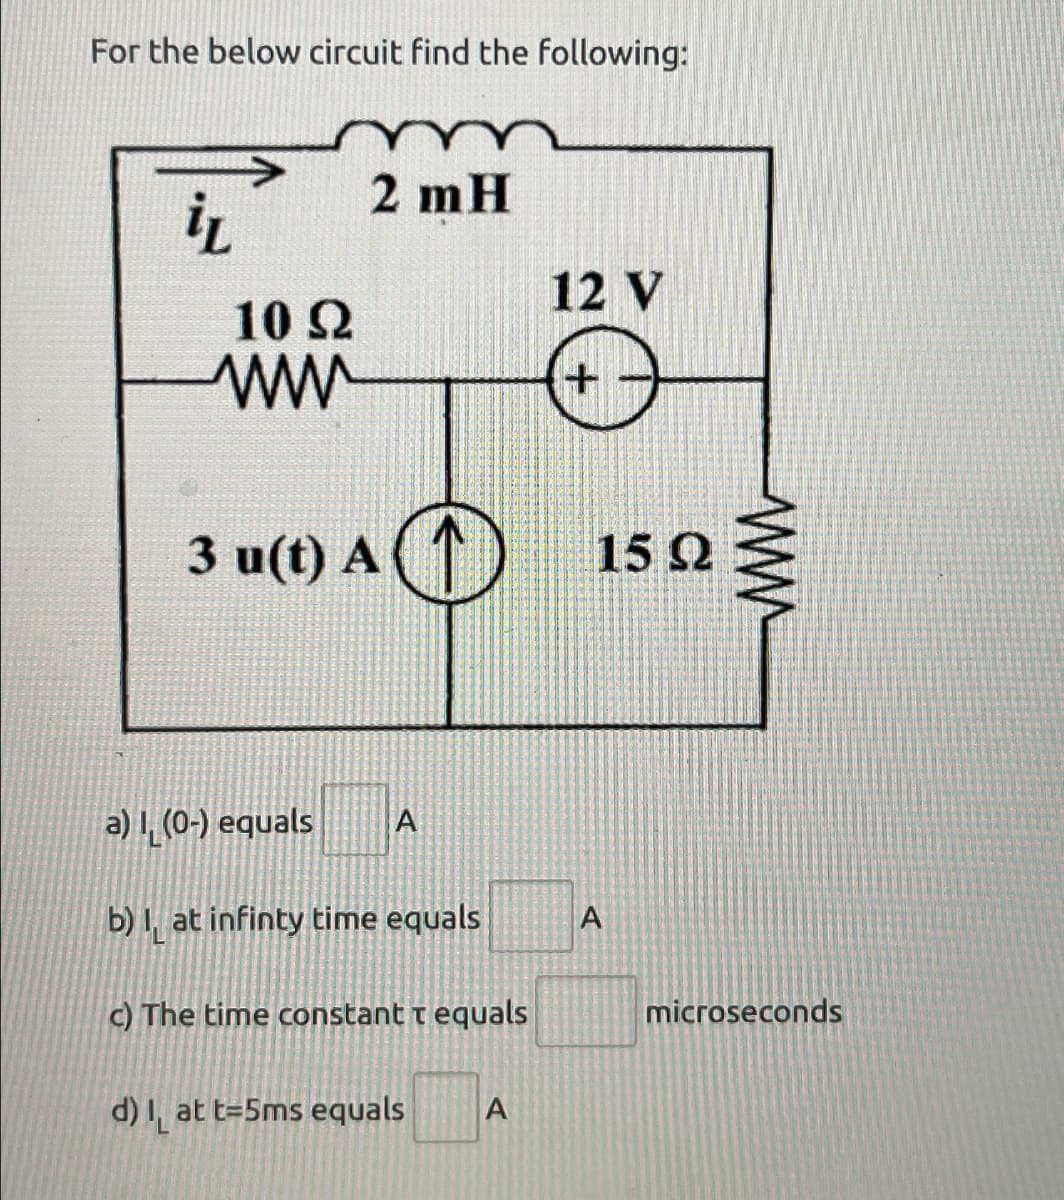 For the below circuit find the following:
iL
10 Ω
ww
2 mH
3 u(t) A ↑
A①
a) 1 (0-) equals
A
b) at infinty time equals
A
c) The time constant t equals
d) at t=5ms equals
A
12 V
+
15 Ω
www
microseconds